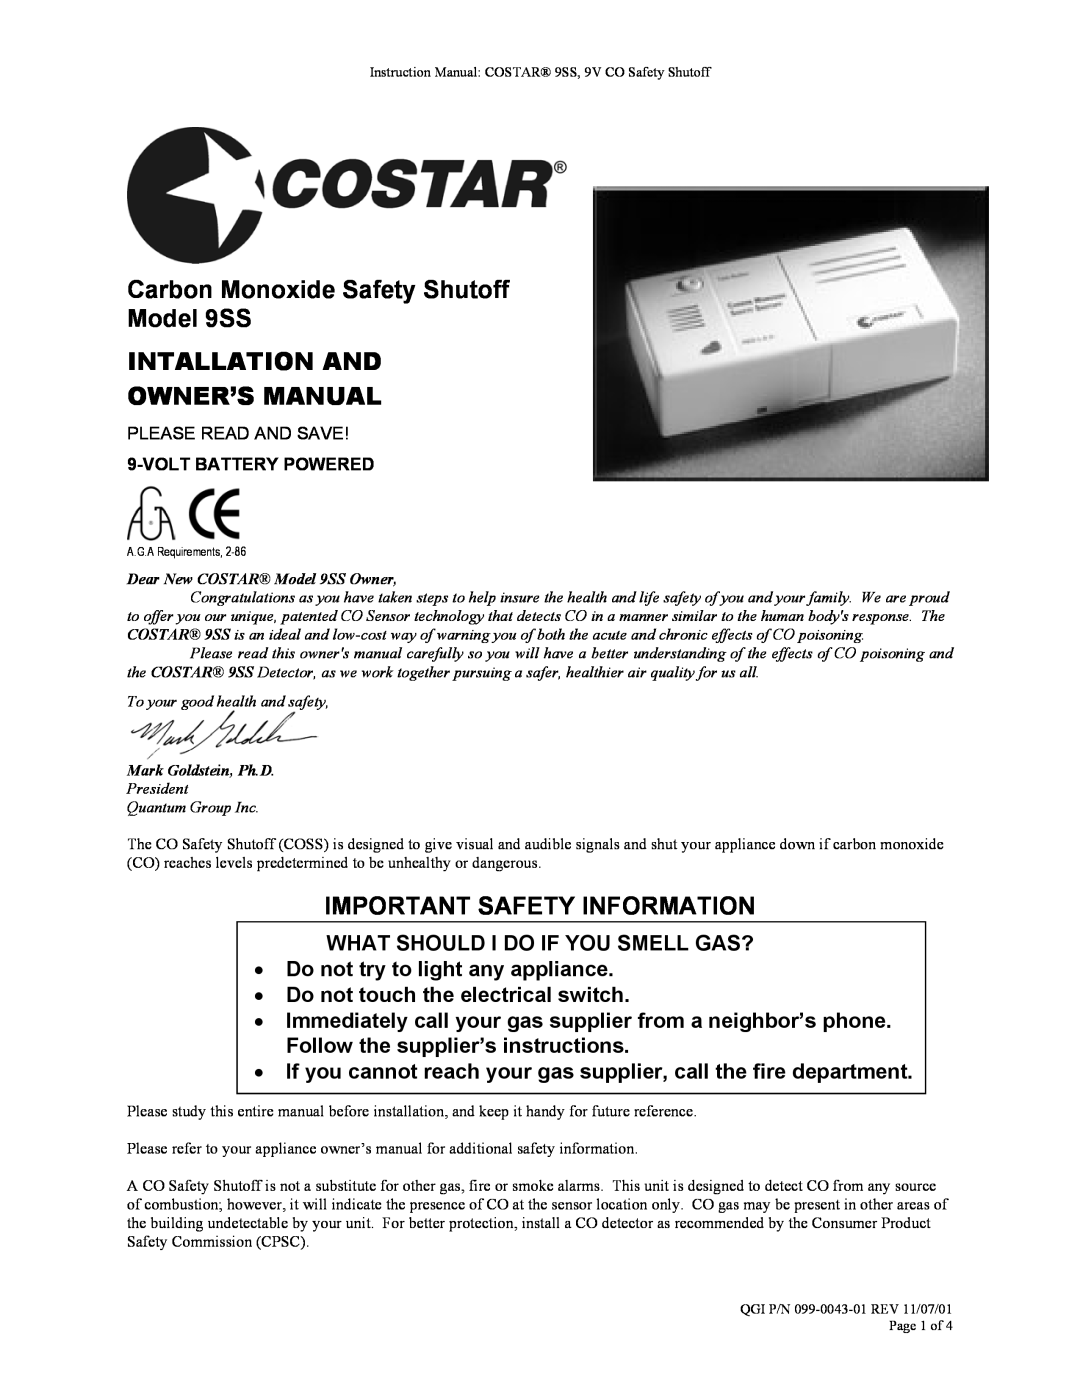 Costar owner manual Carbon Monoxide Safety Shutoff Model 9SS, Important Safety Information, Please Read And Save 